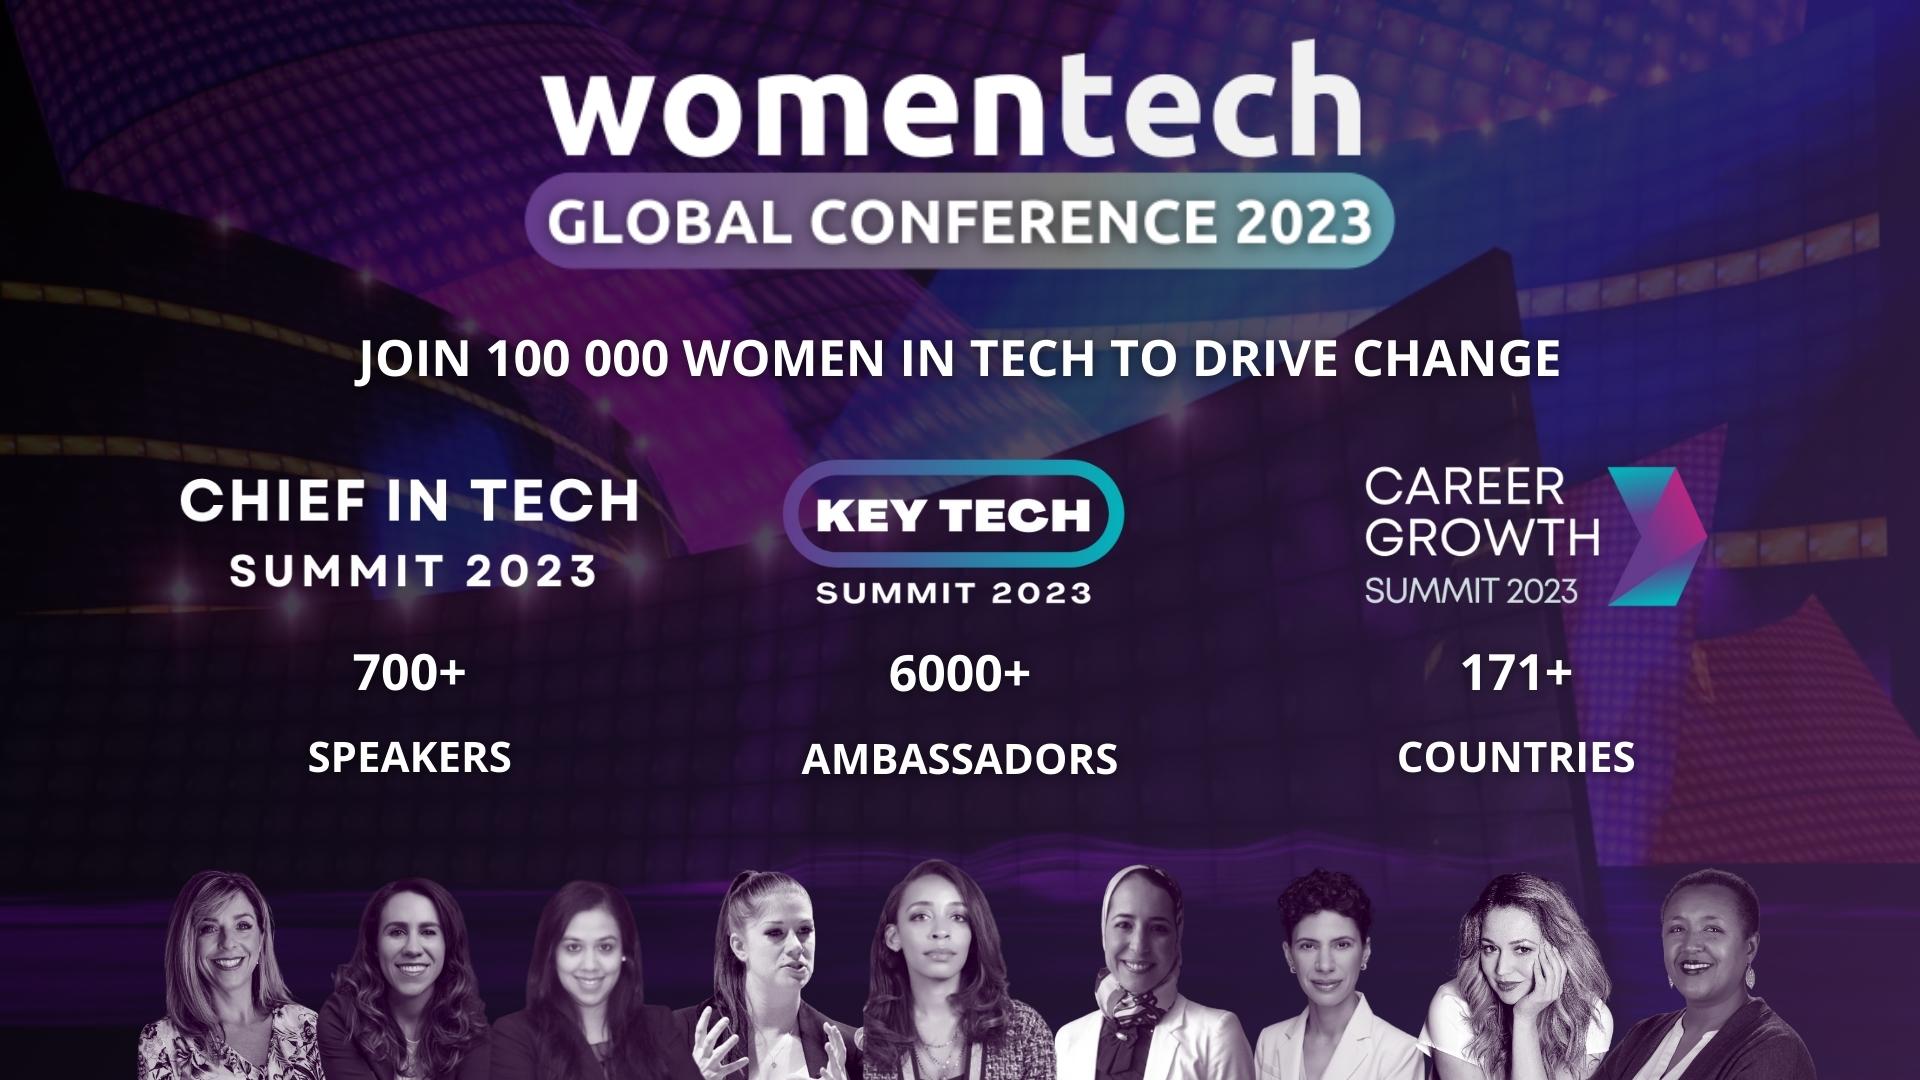 Chief in Tech Summit at the Women in Tech Conference 2023 Virtual